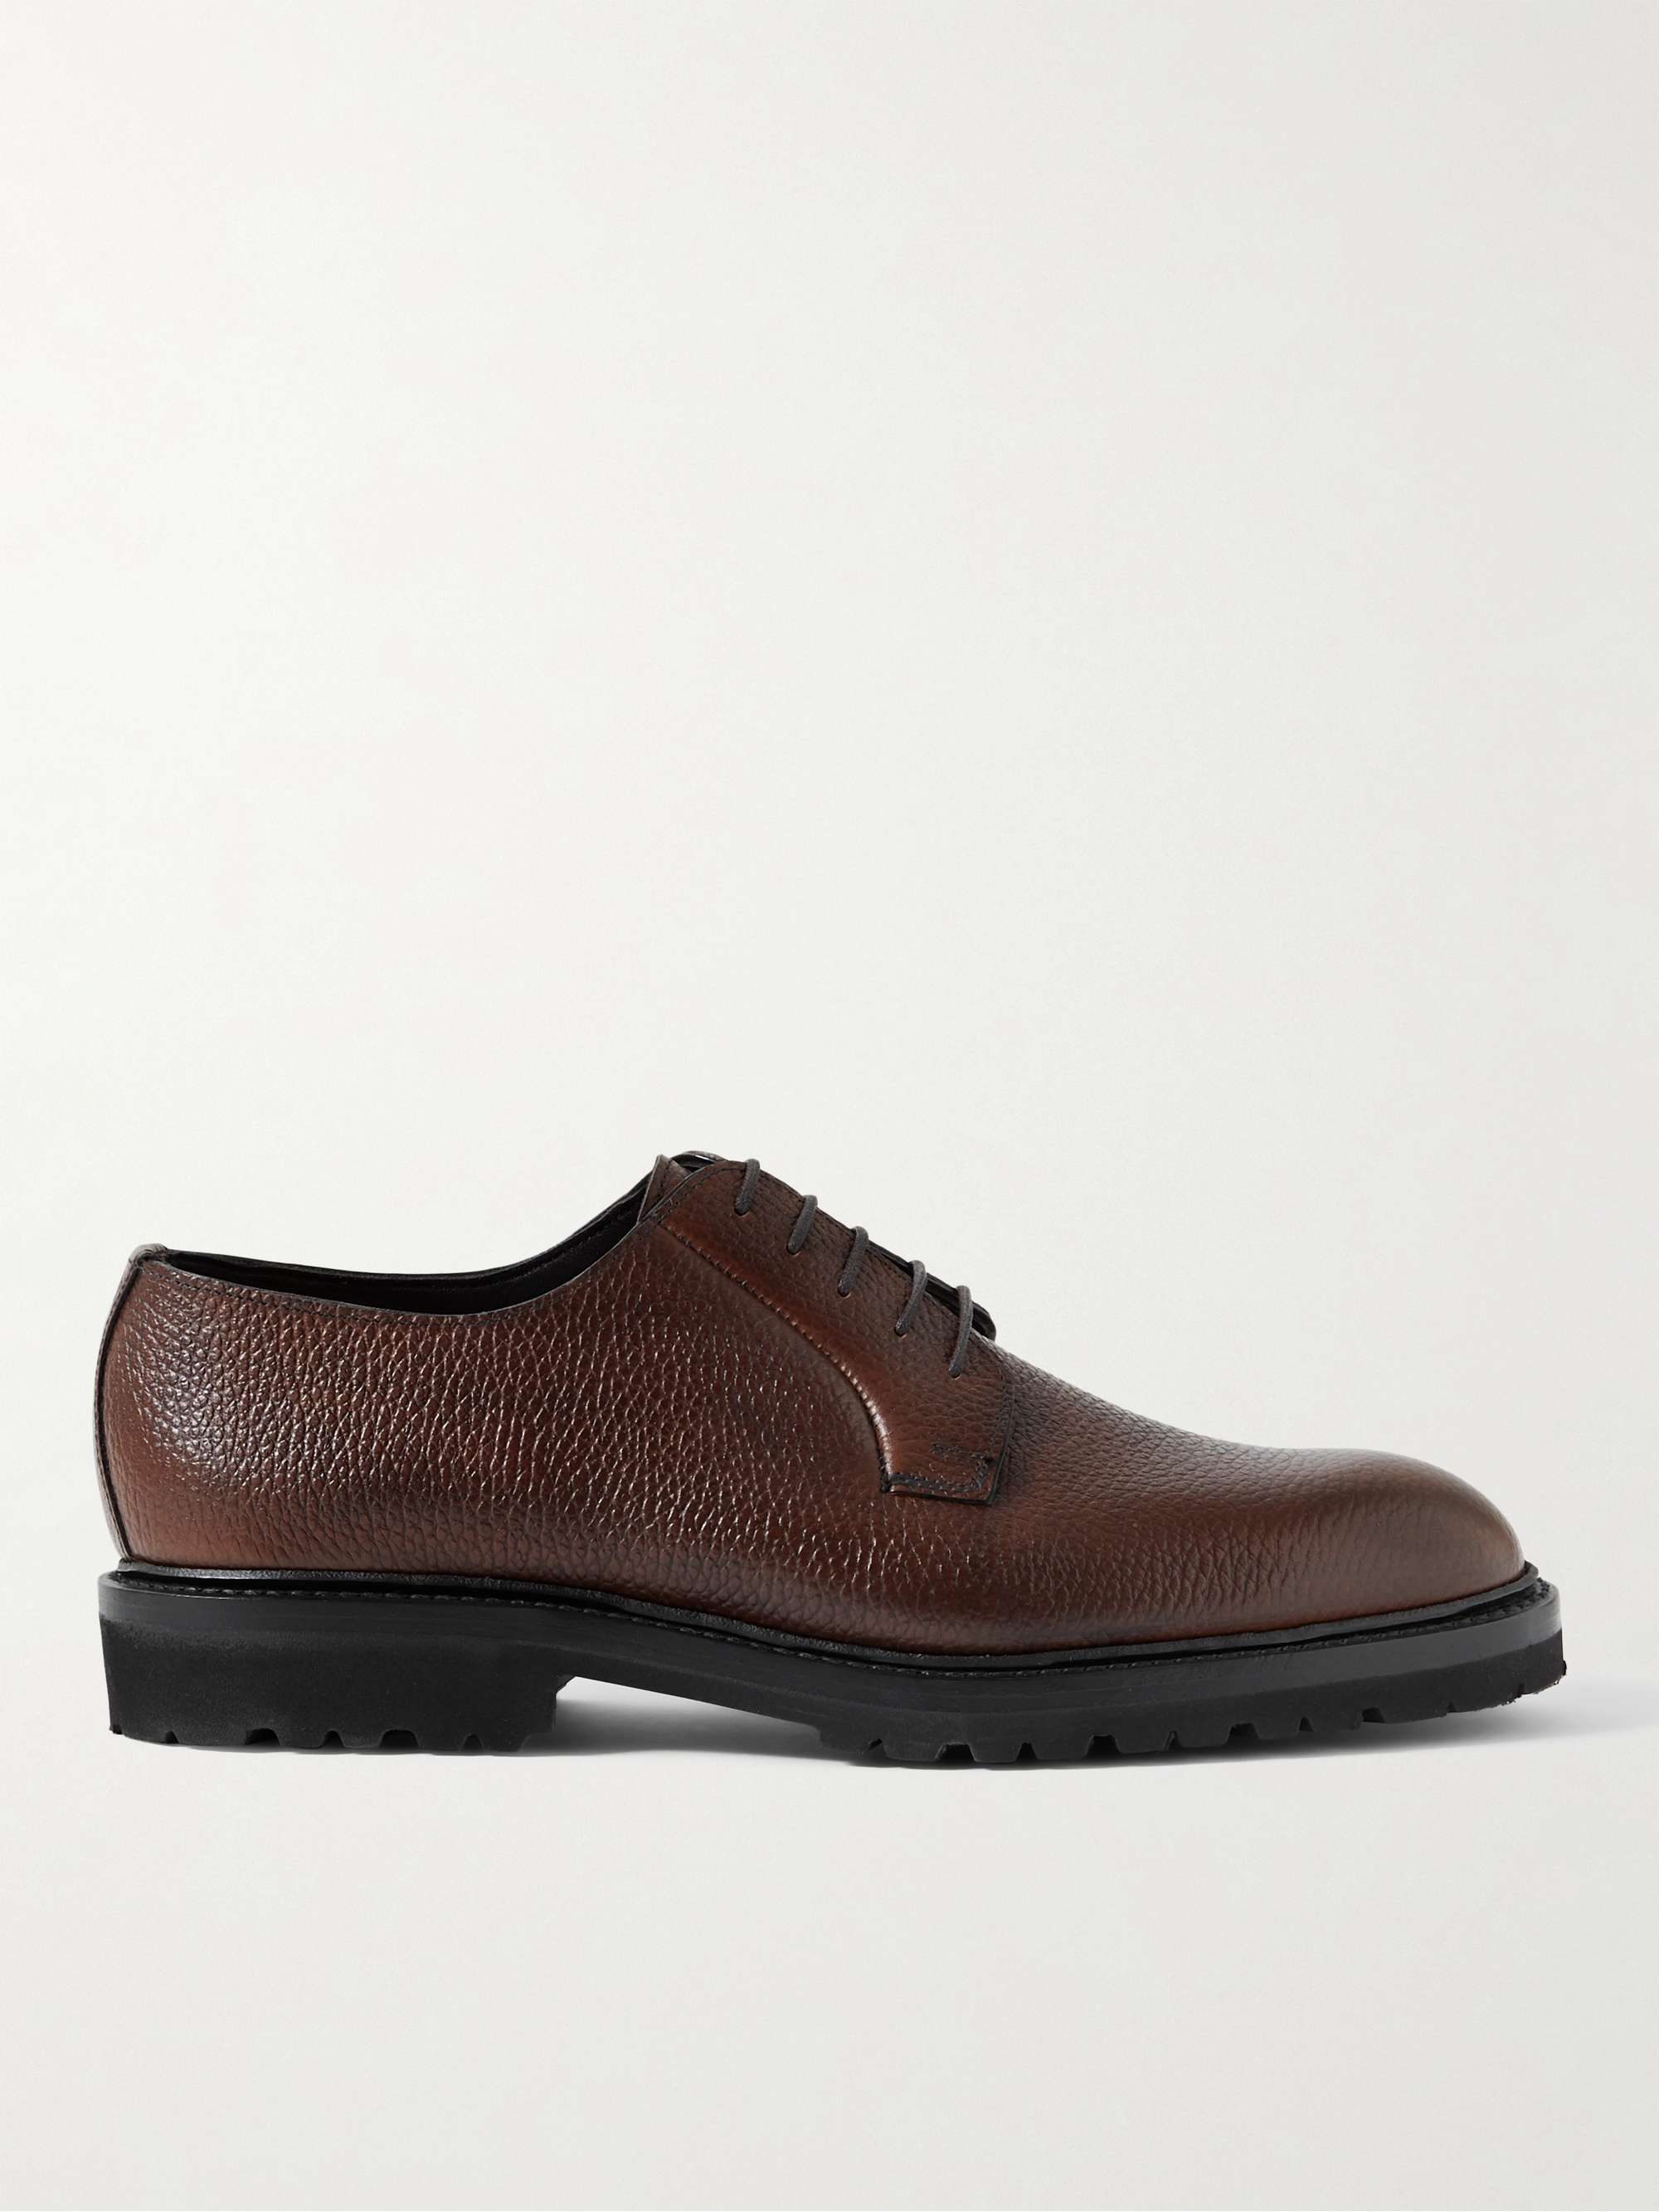 GEORGE CLEVERLEY Archie Full-Grain Leather Derby Shoes